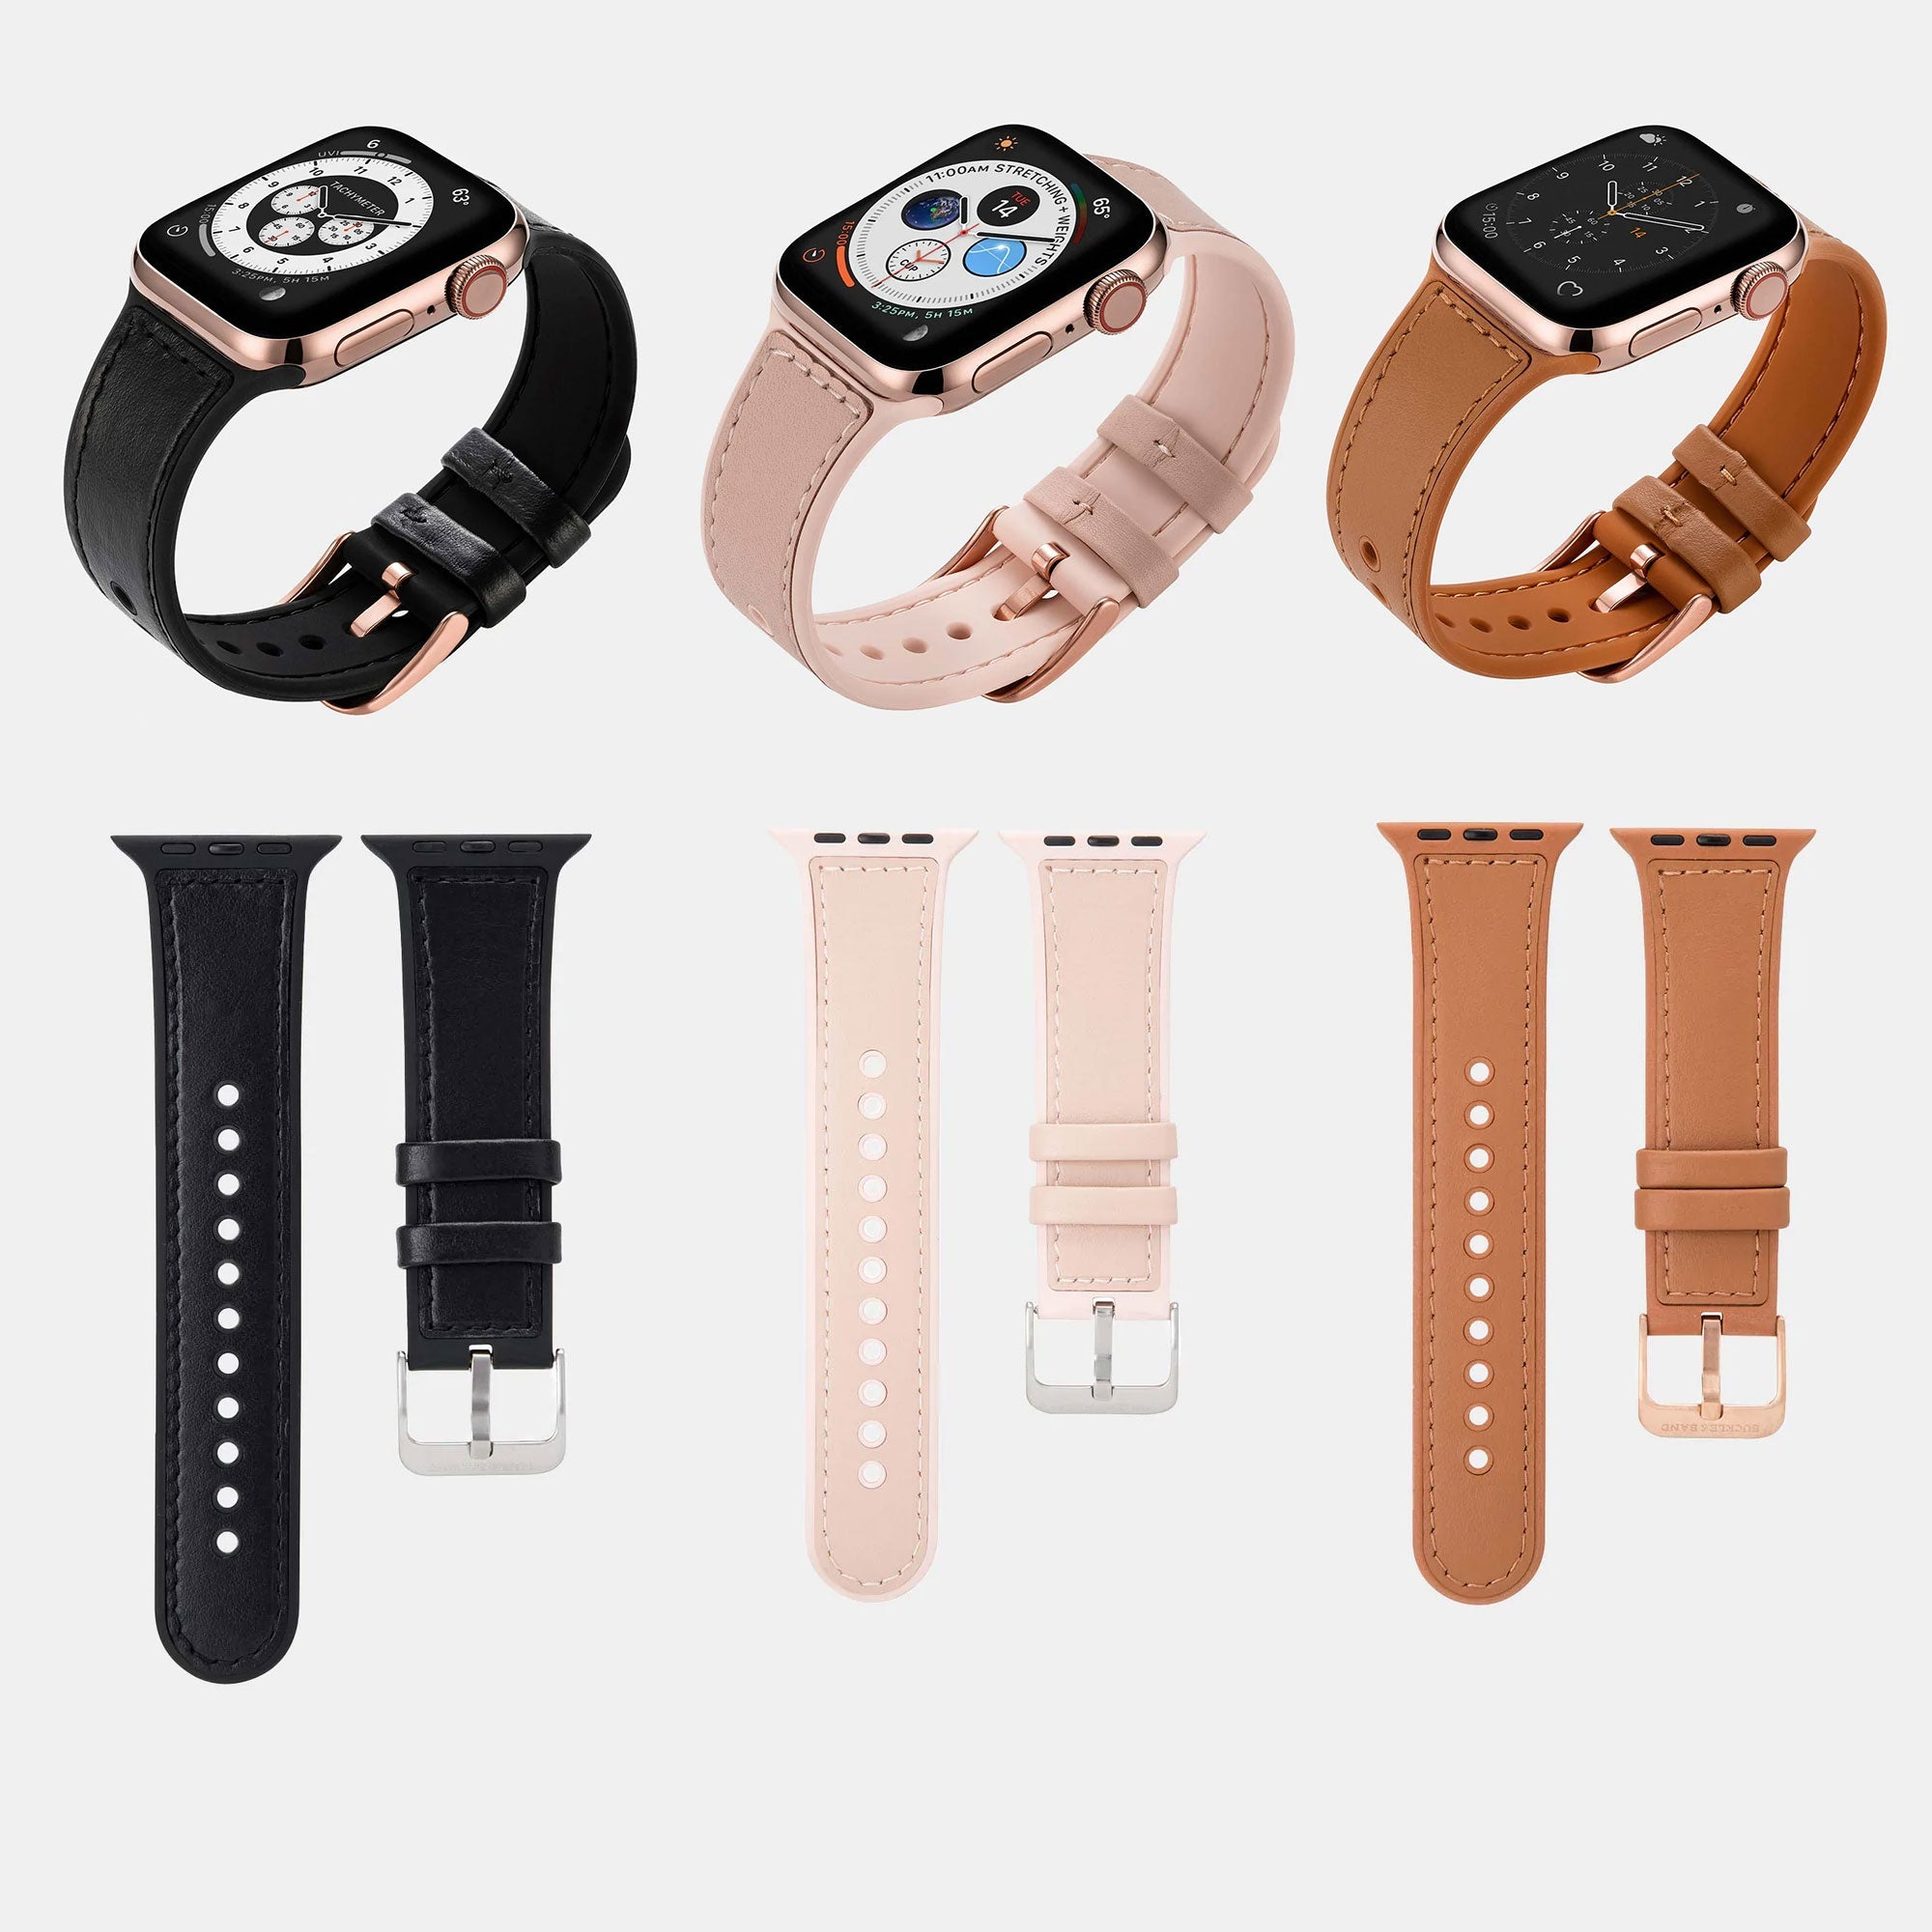 Pre-Loved Mona Hybrid Sport/Leather Apple Watch Strap Black, Pink or Brown - Buckle & Band - PL-MON-38-BLK-SI